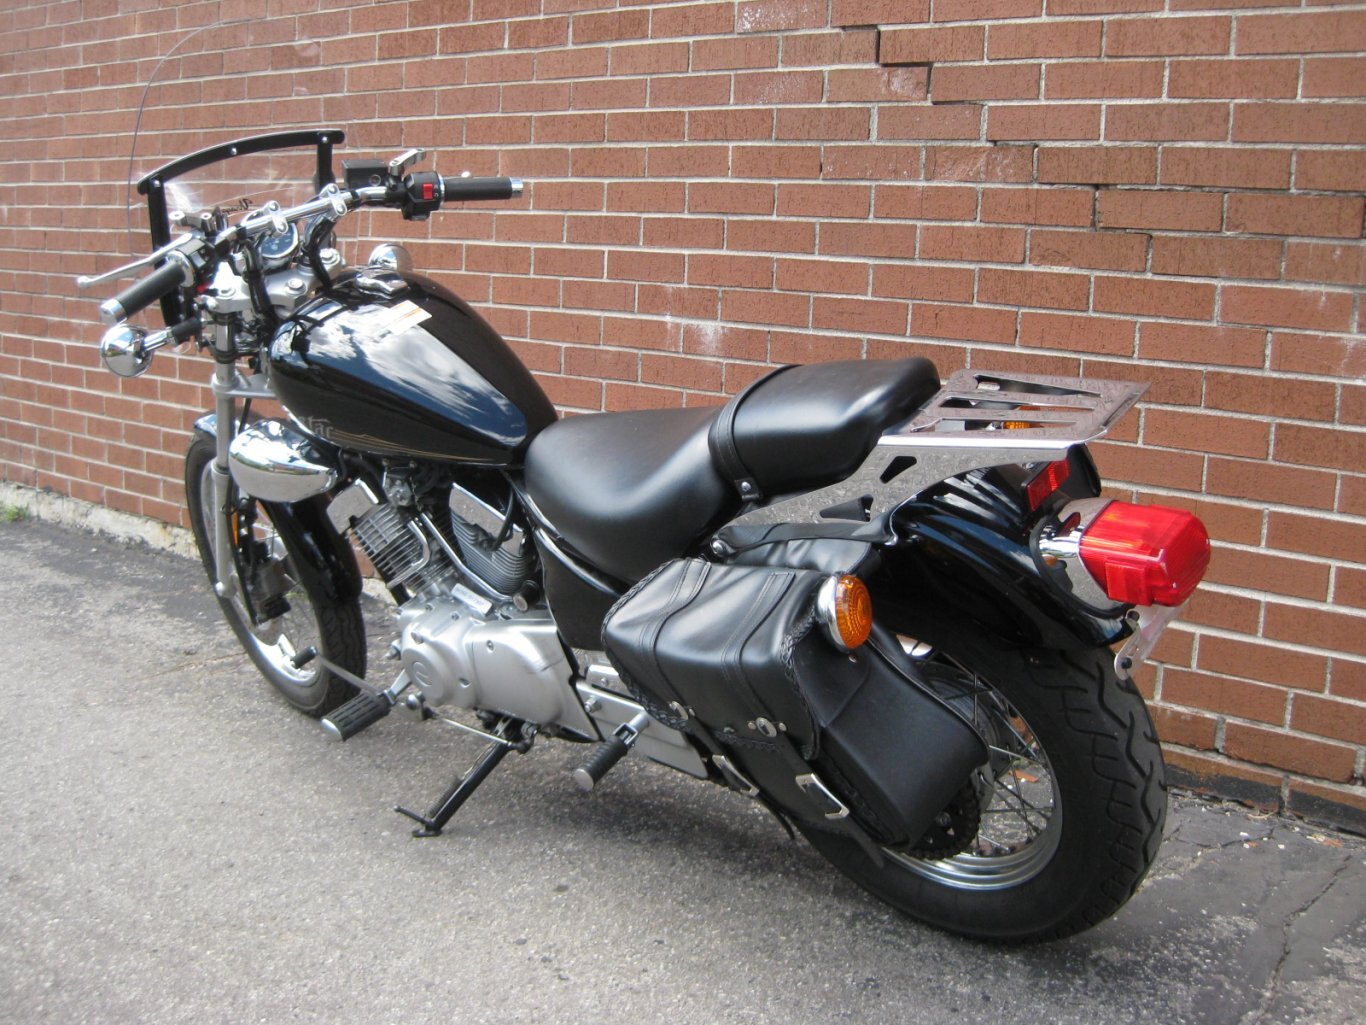 2012 XV250 V Star SOLD CONGRATULATIONS ANGELA, WELCOME TO THE WORLD OF TWO WHEELED EXCITEMENT!